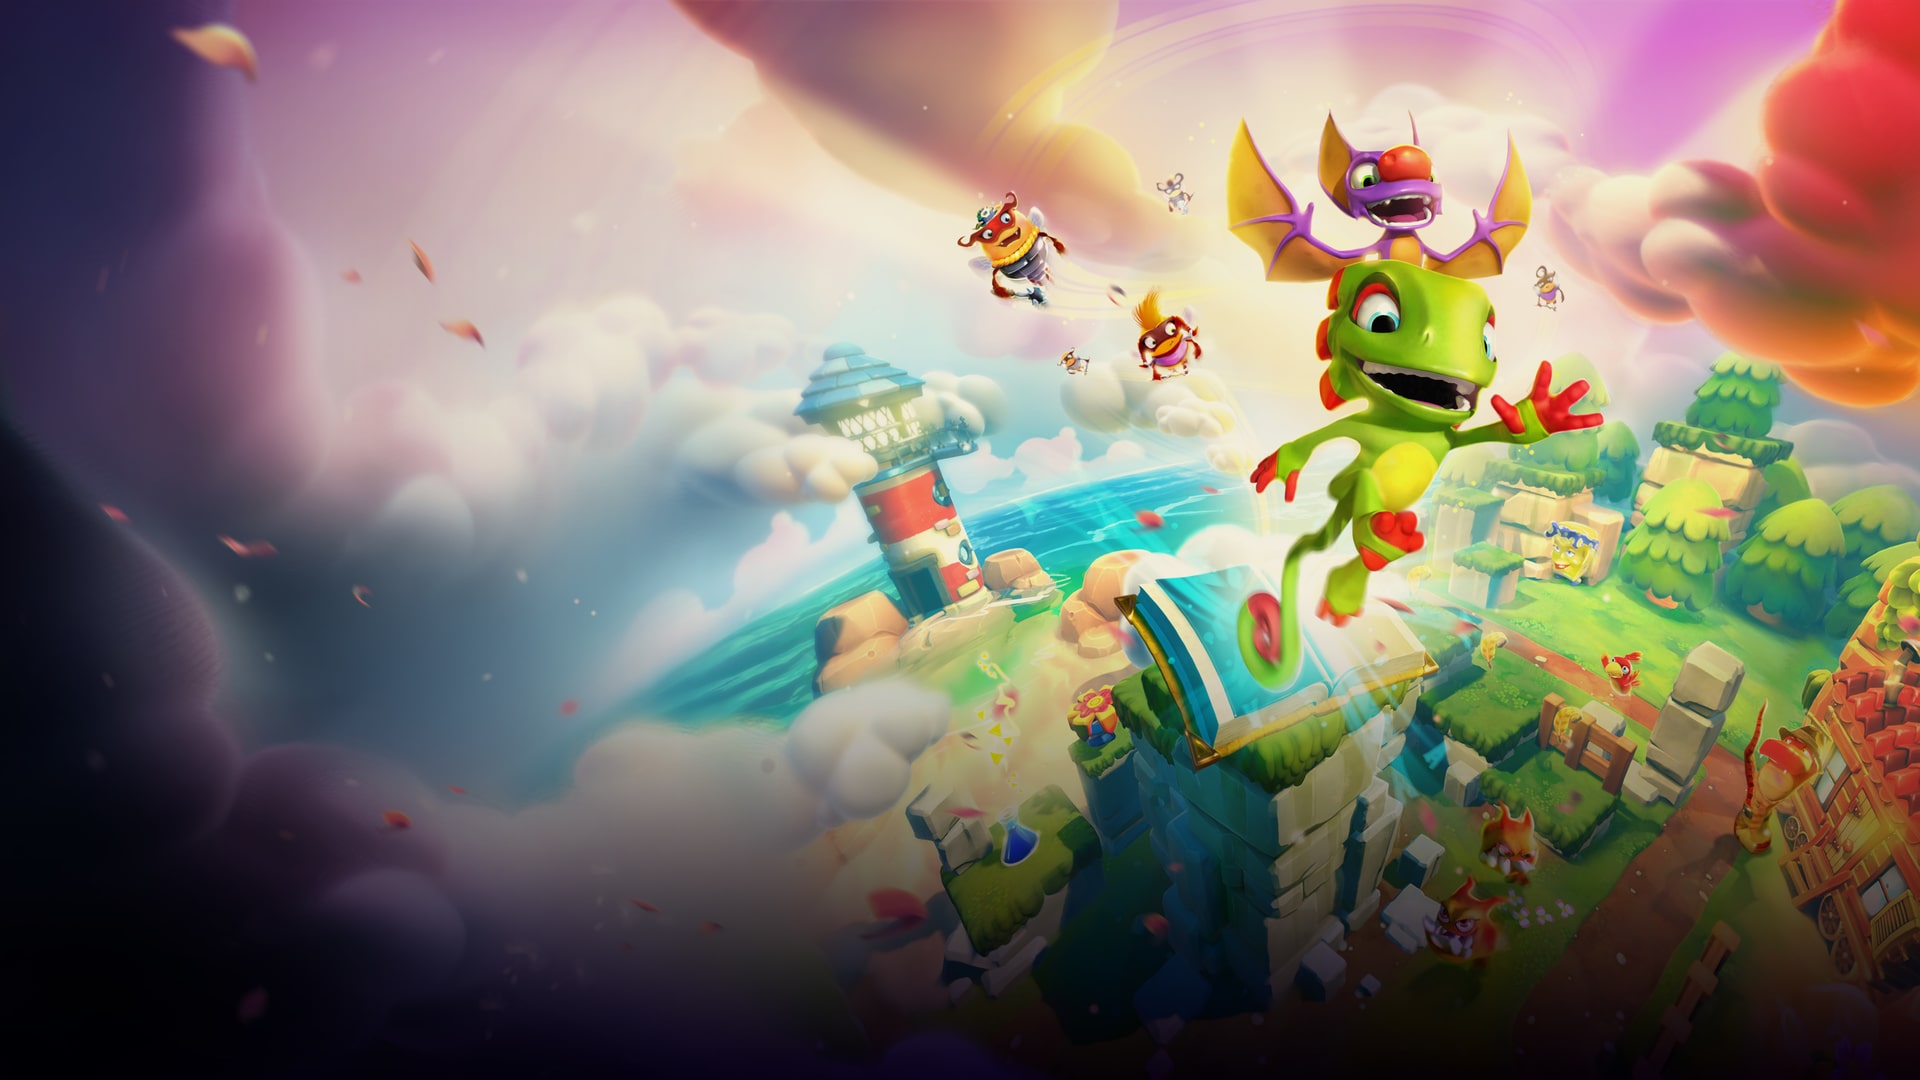 Yooka-Laylee and the Impossible Lair (Simplified Chinese, English, Japanese)